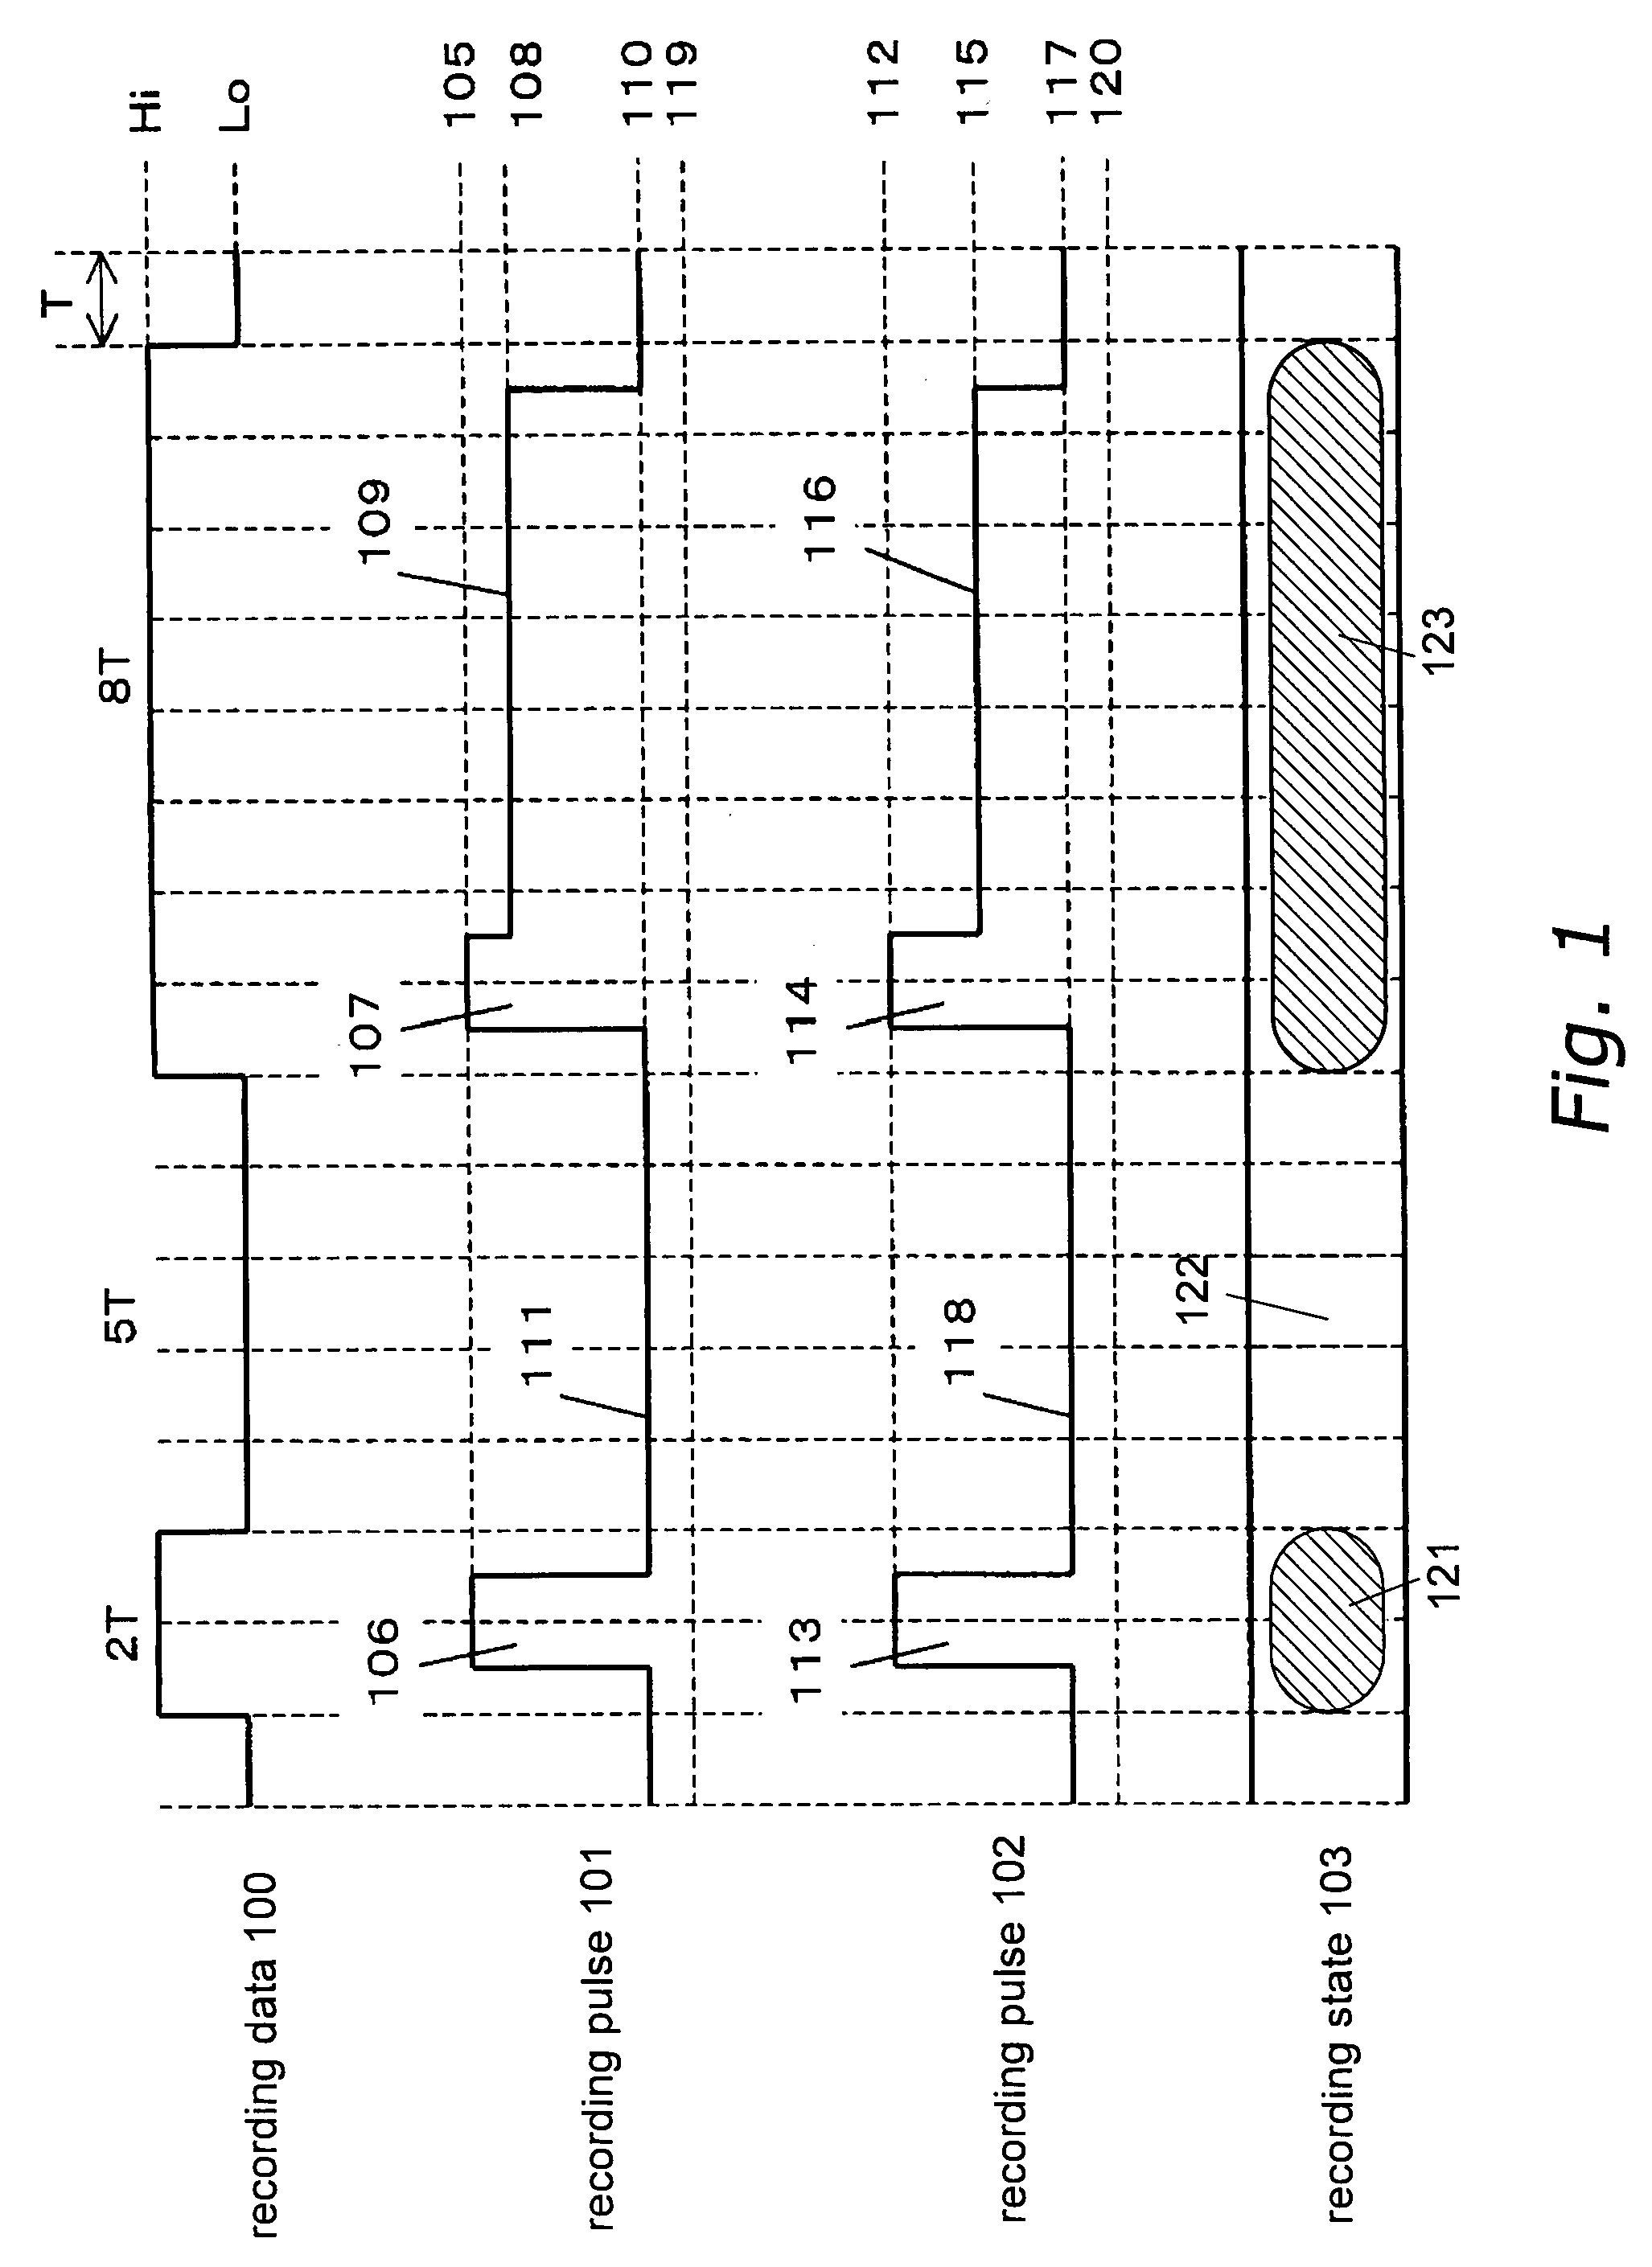 Optical Disc Recording Device, Method for Recording Data Onto Optical Disc, and Optical Disc